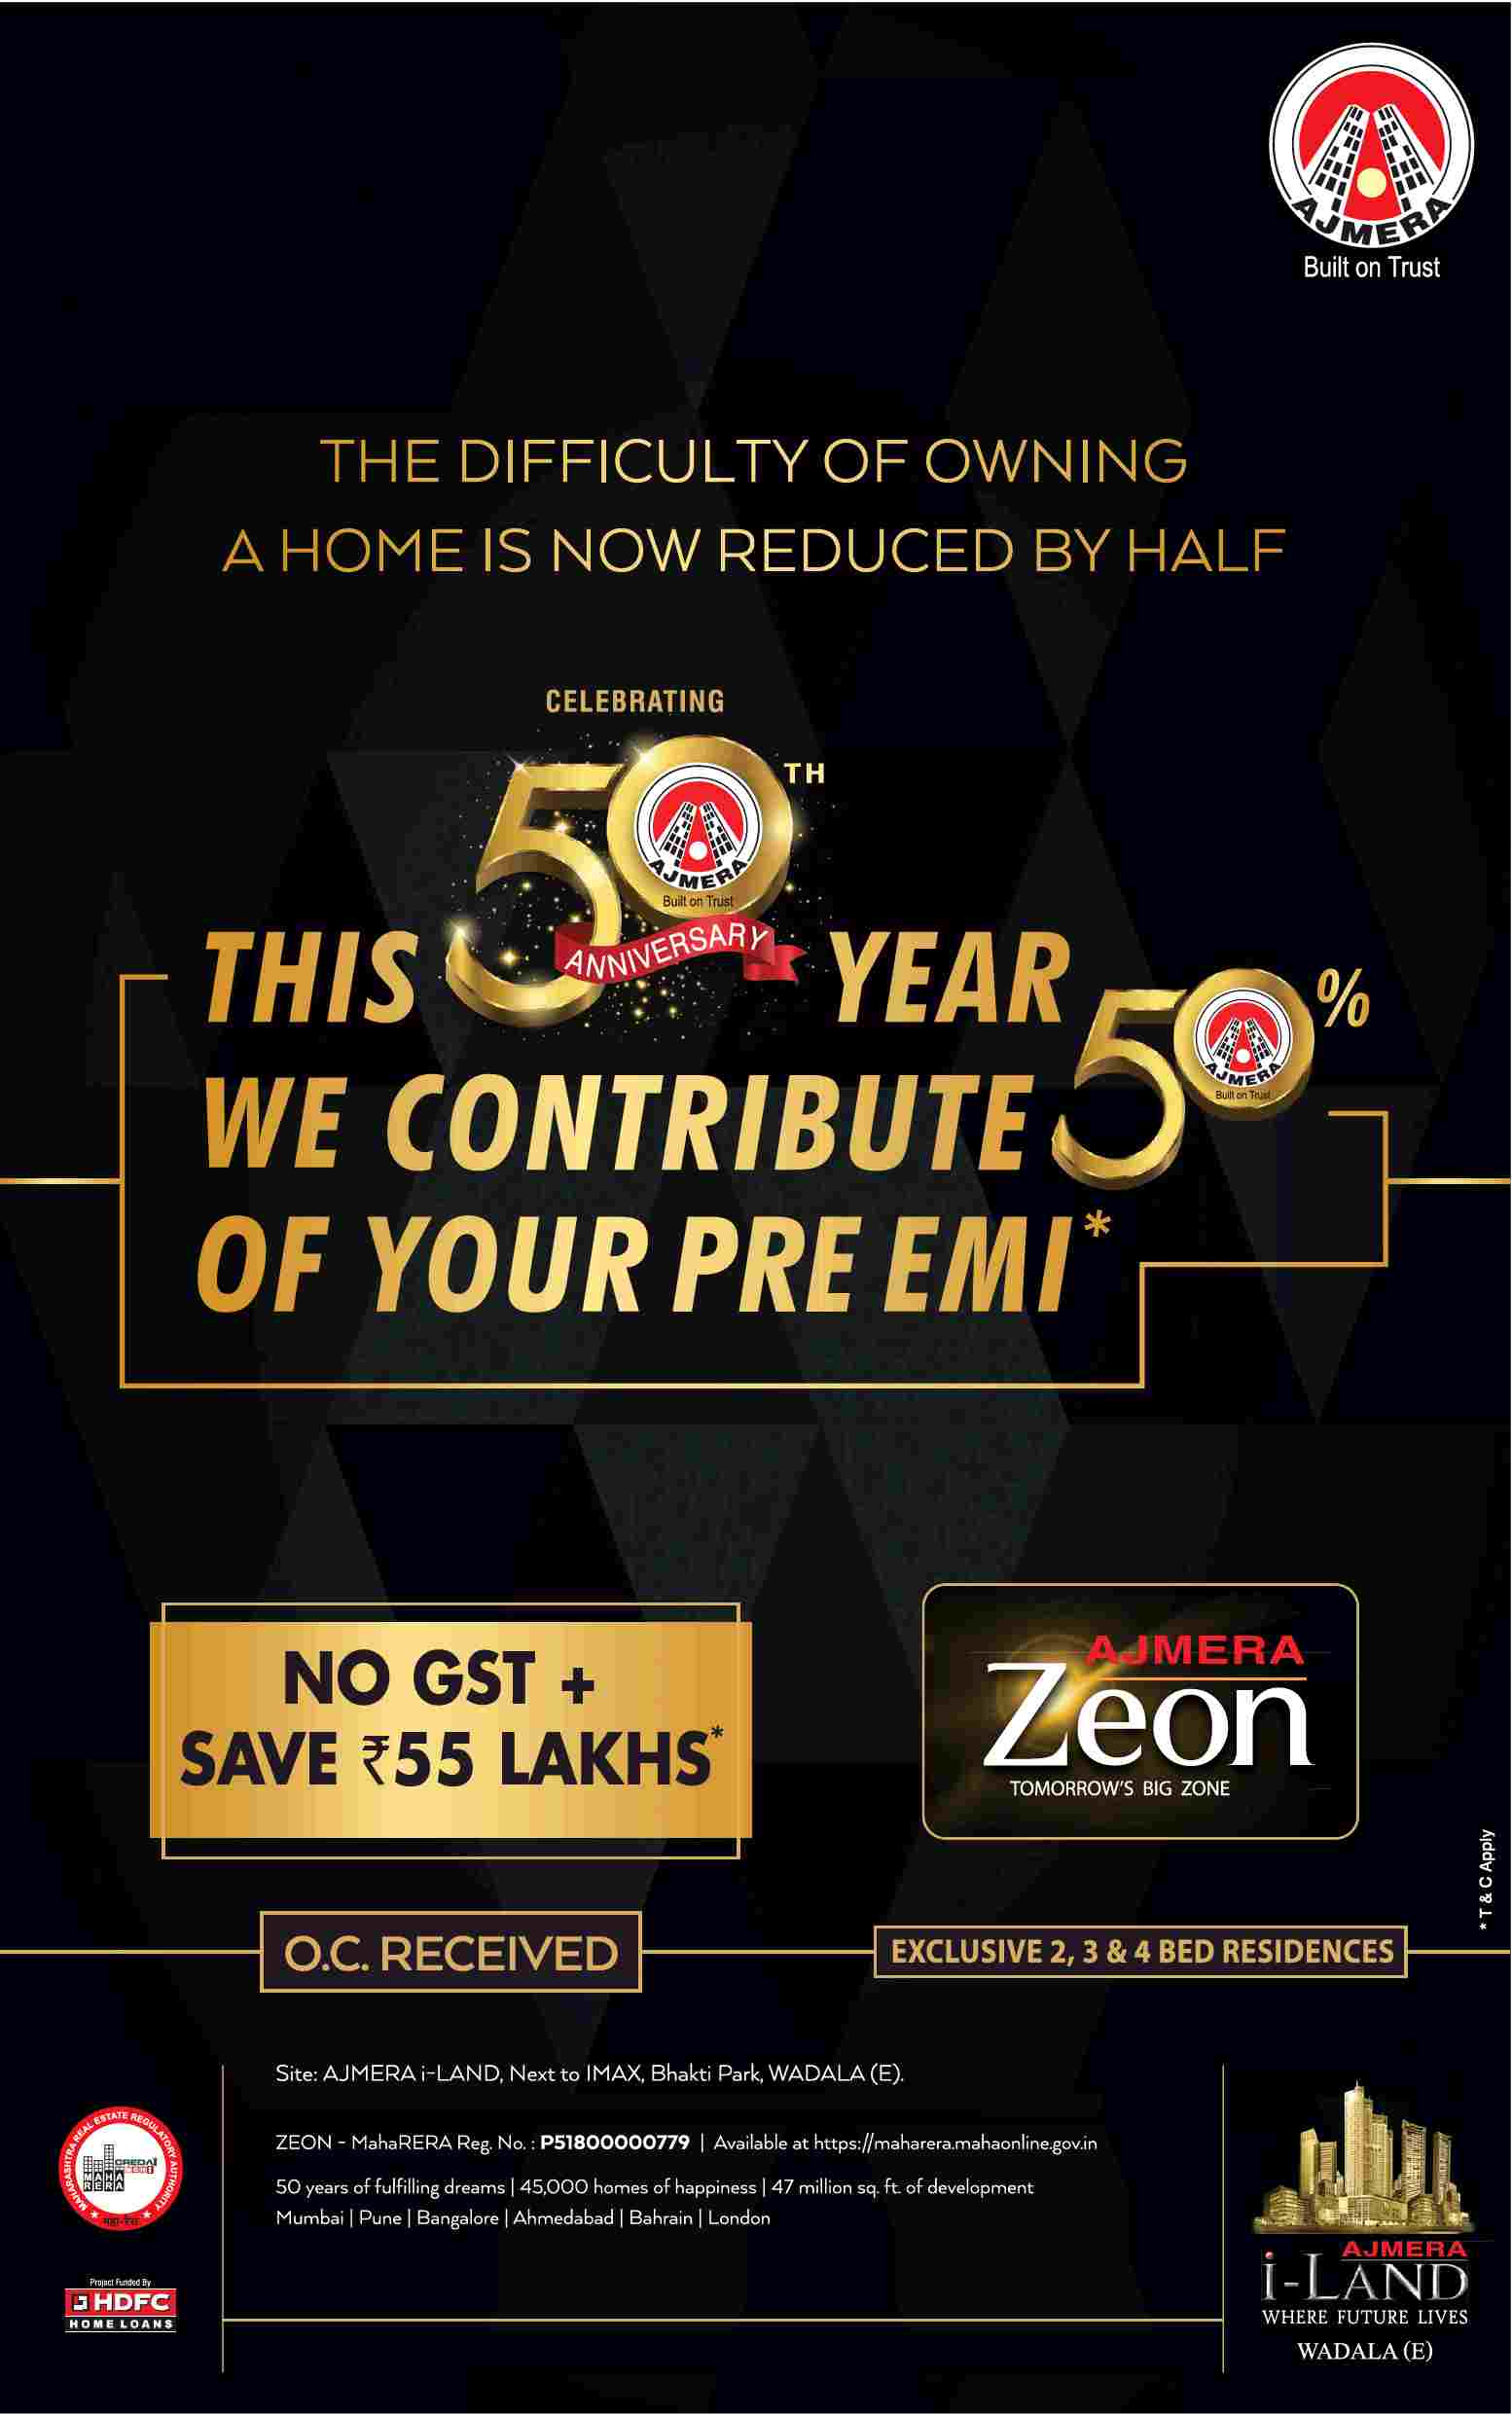 Now save Rs. 55 Lakhs & pay no GST by booking home at Ajmera Zeon in Mumbai